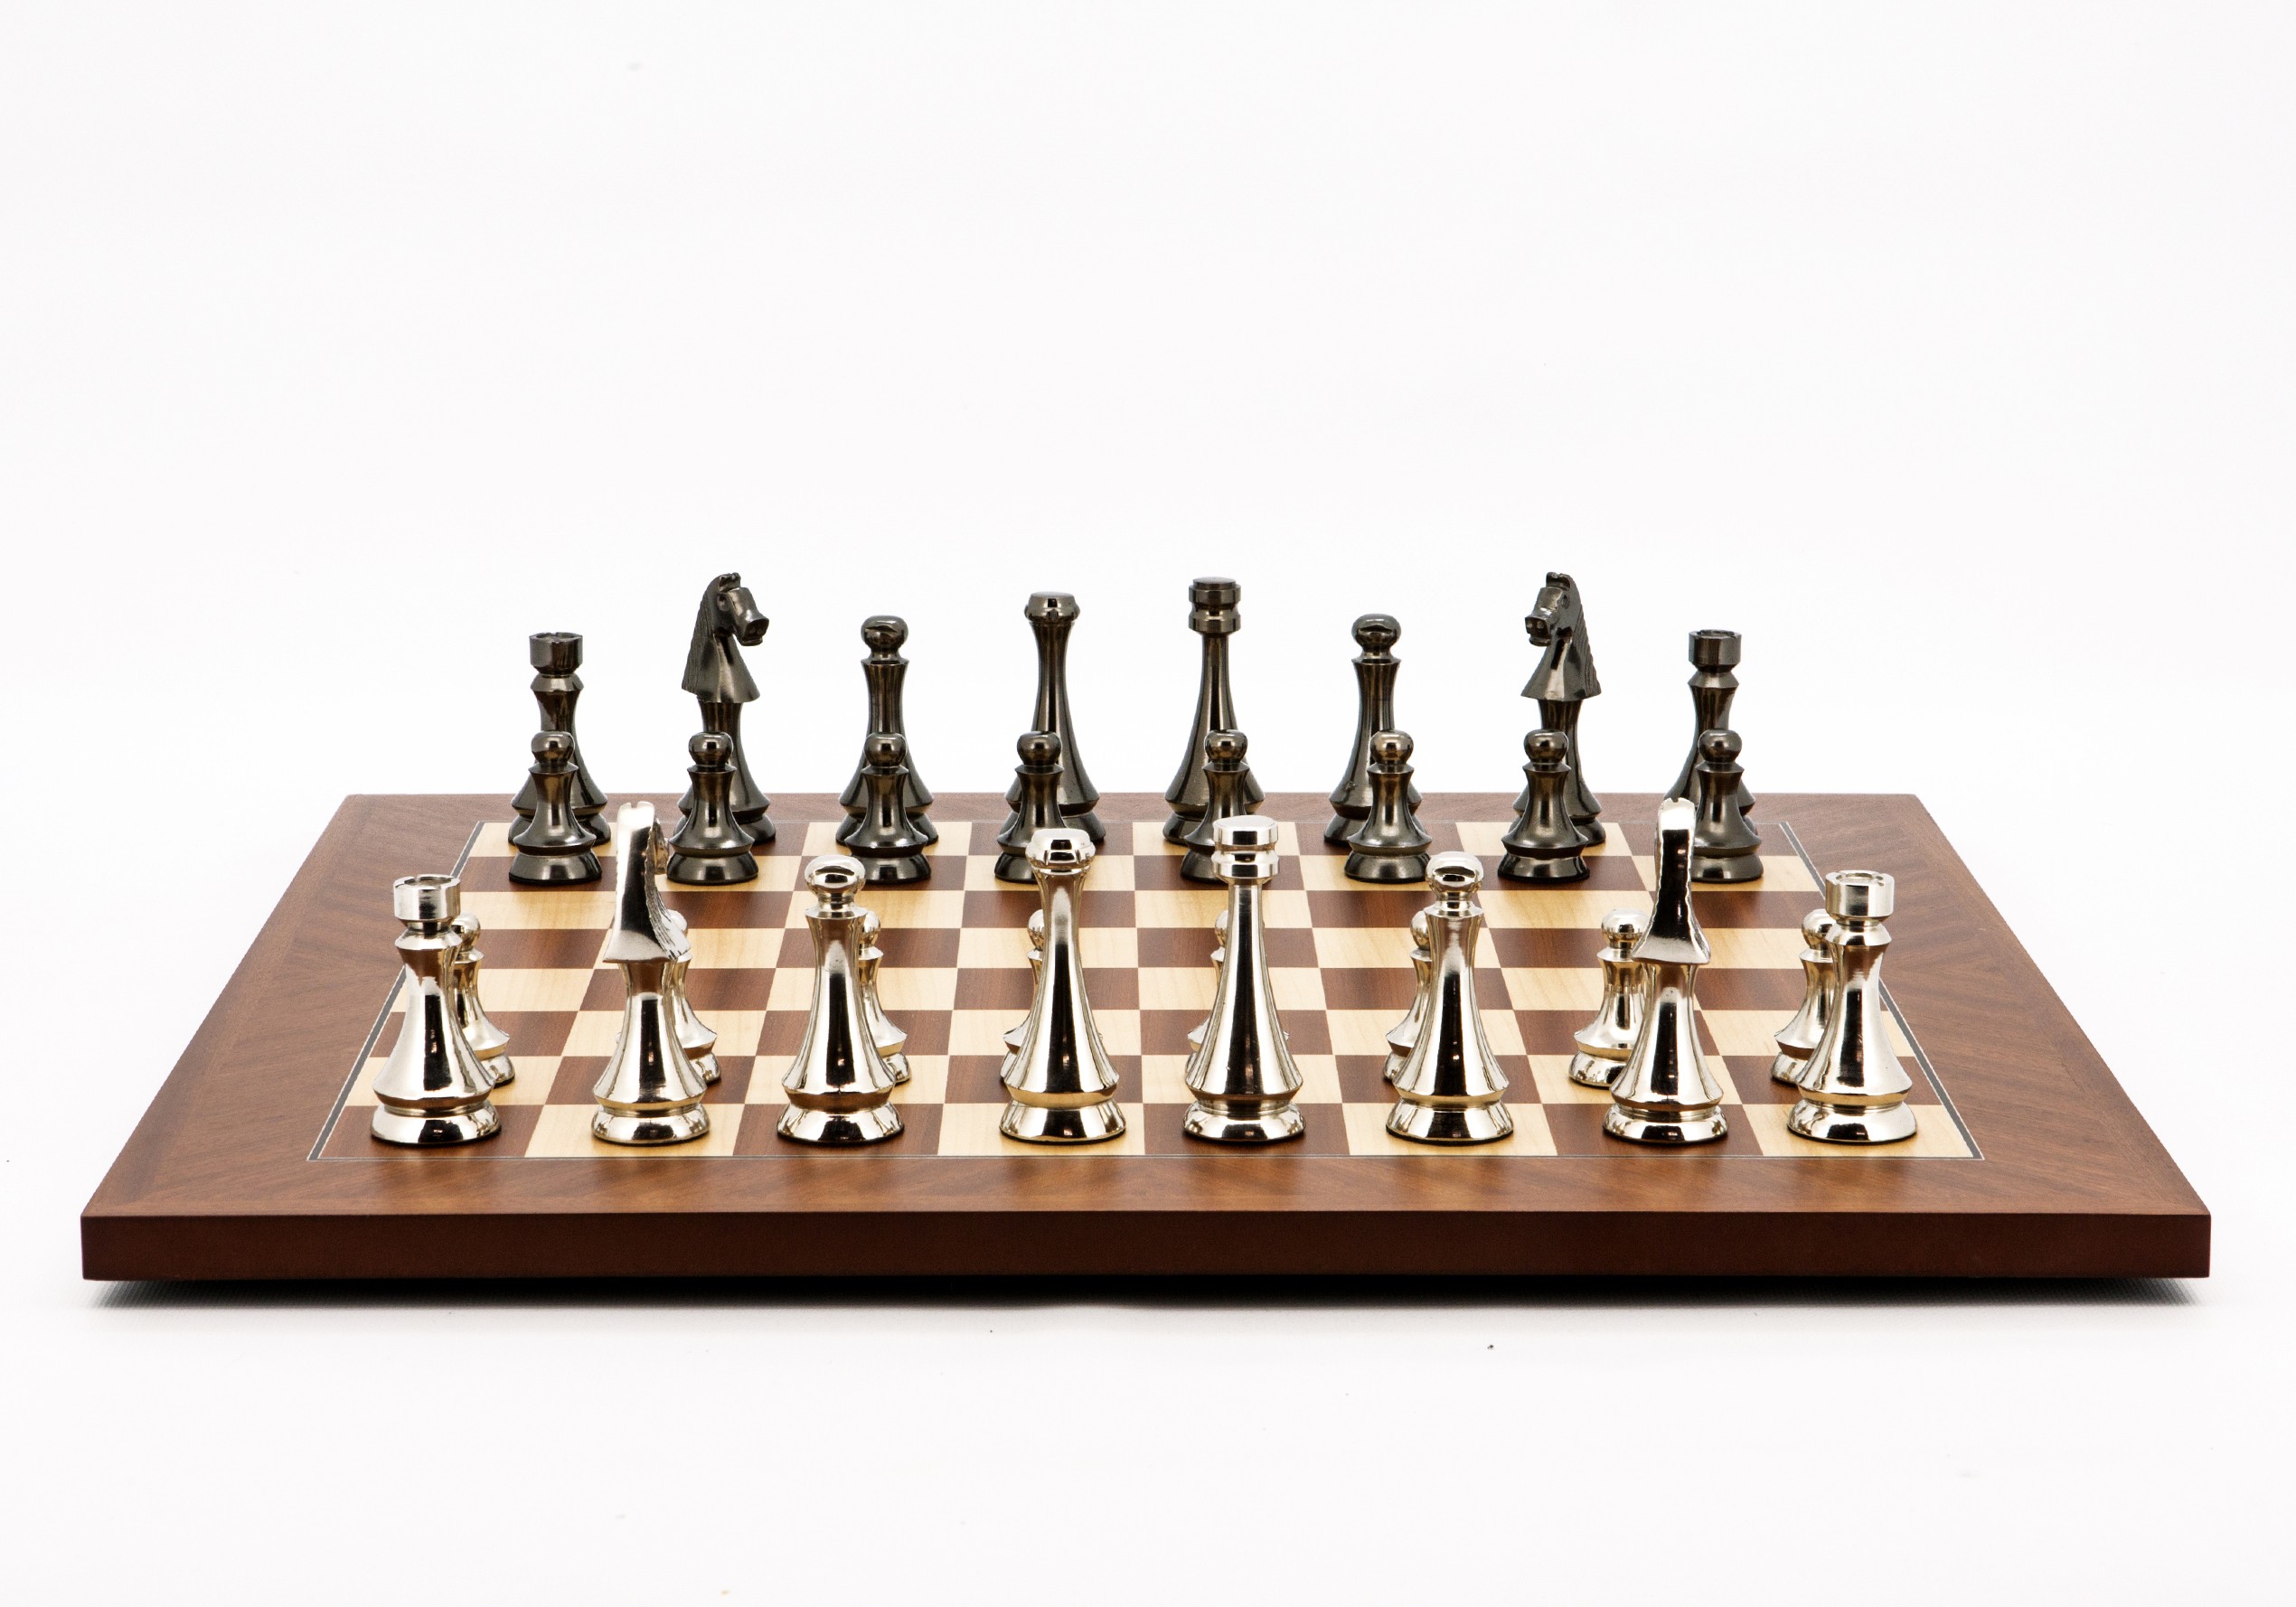 Dal Rossi Italy Chess Set Mahogany Maple Flat Board 50cm, With Metal Dark Titanium and Silver chessmen 85mm